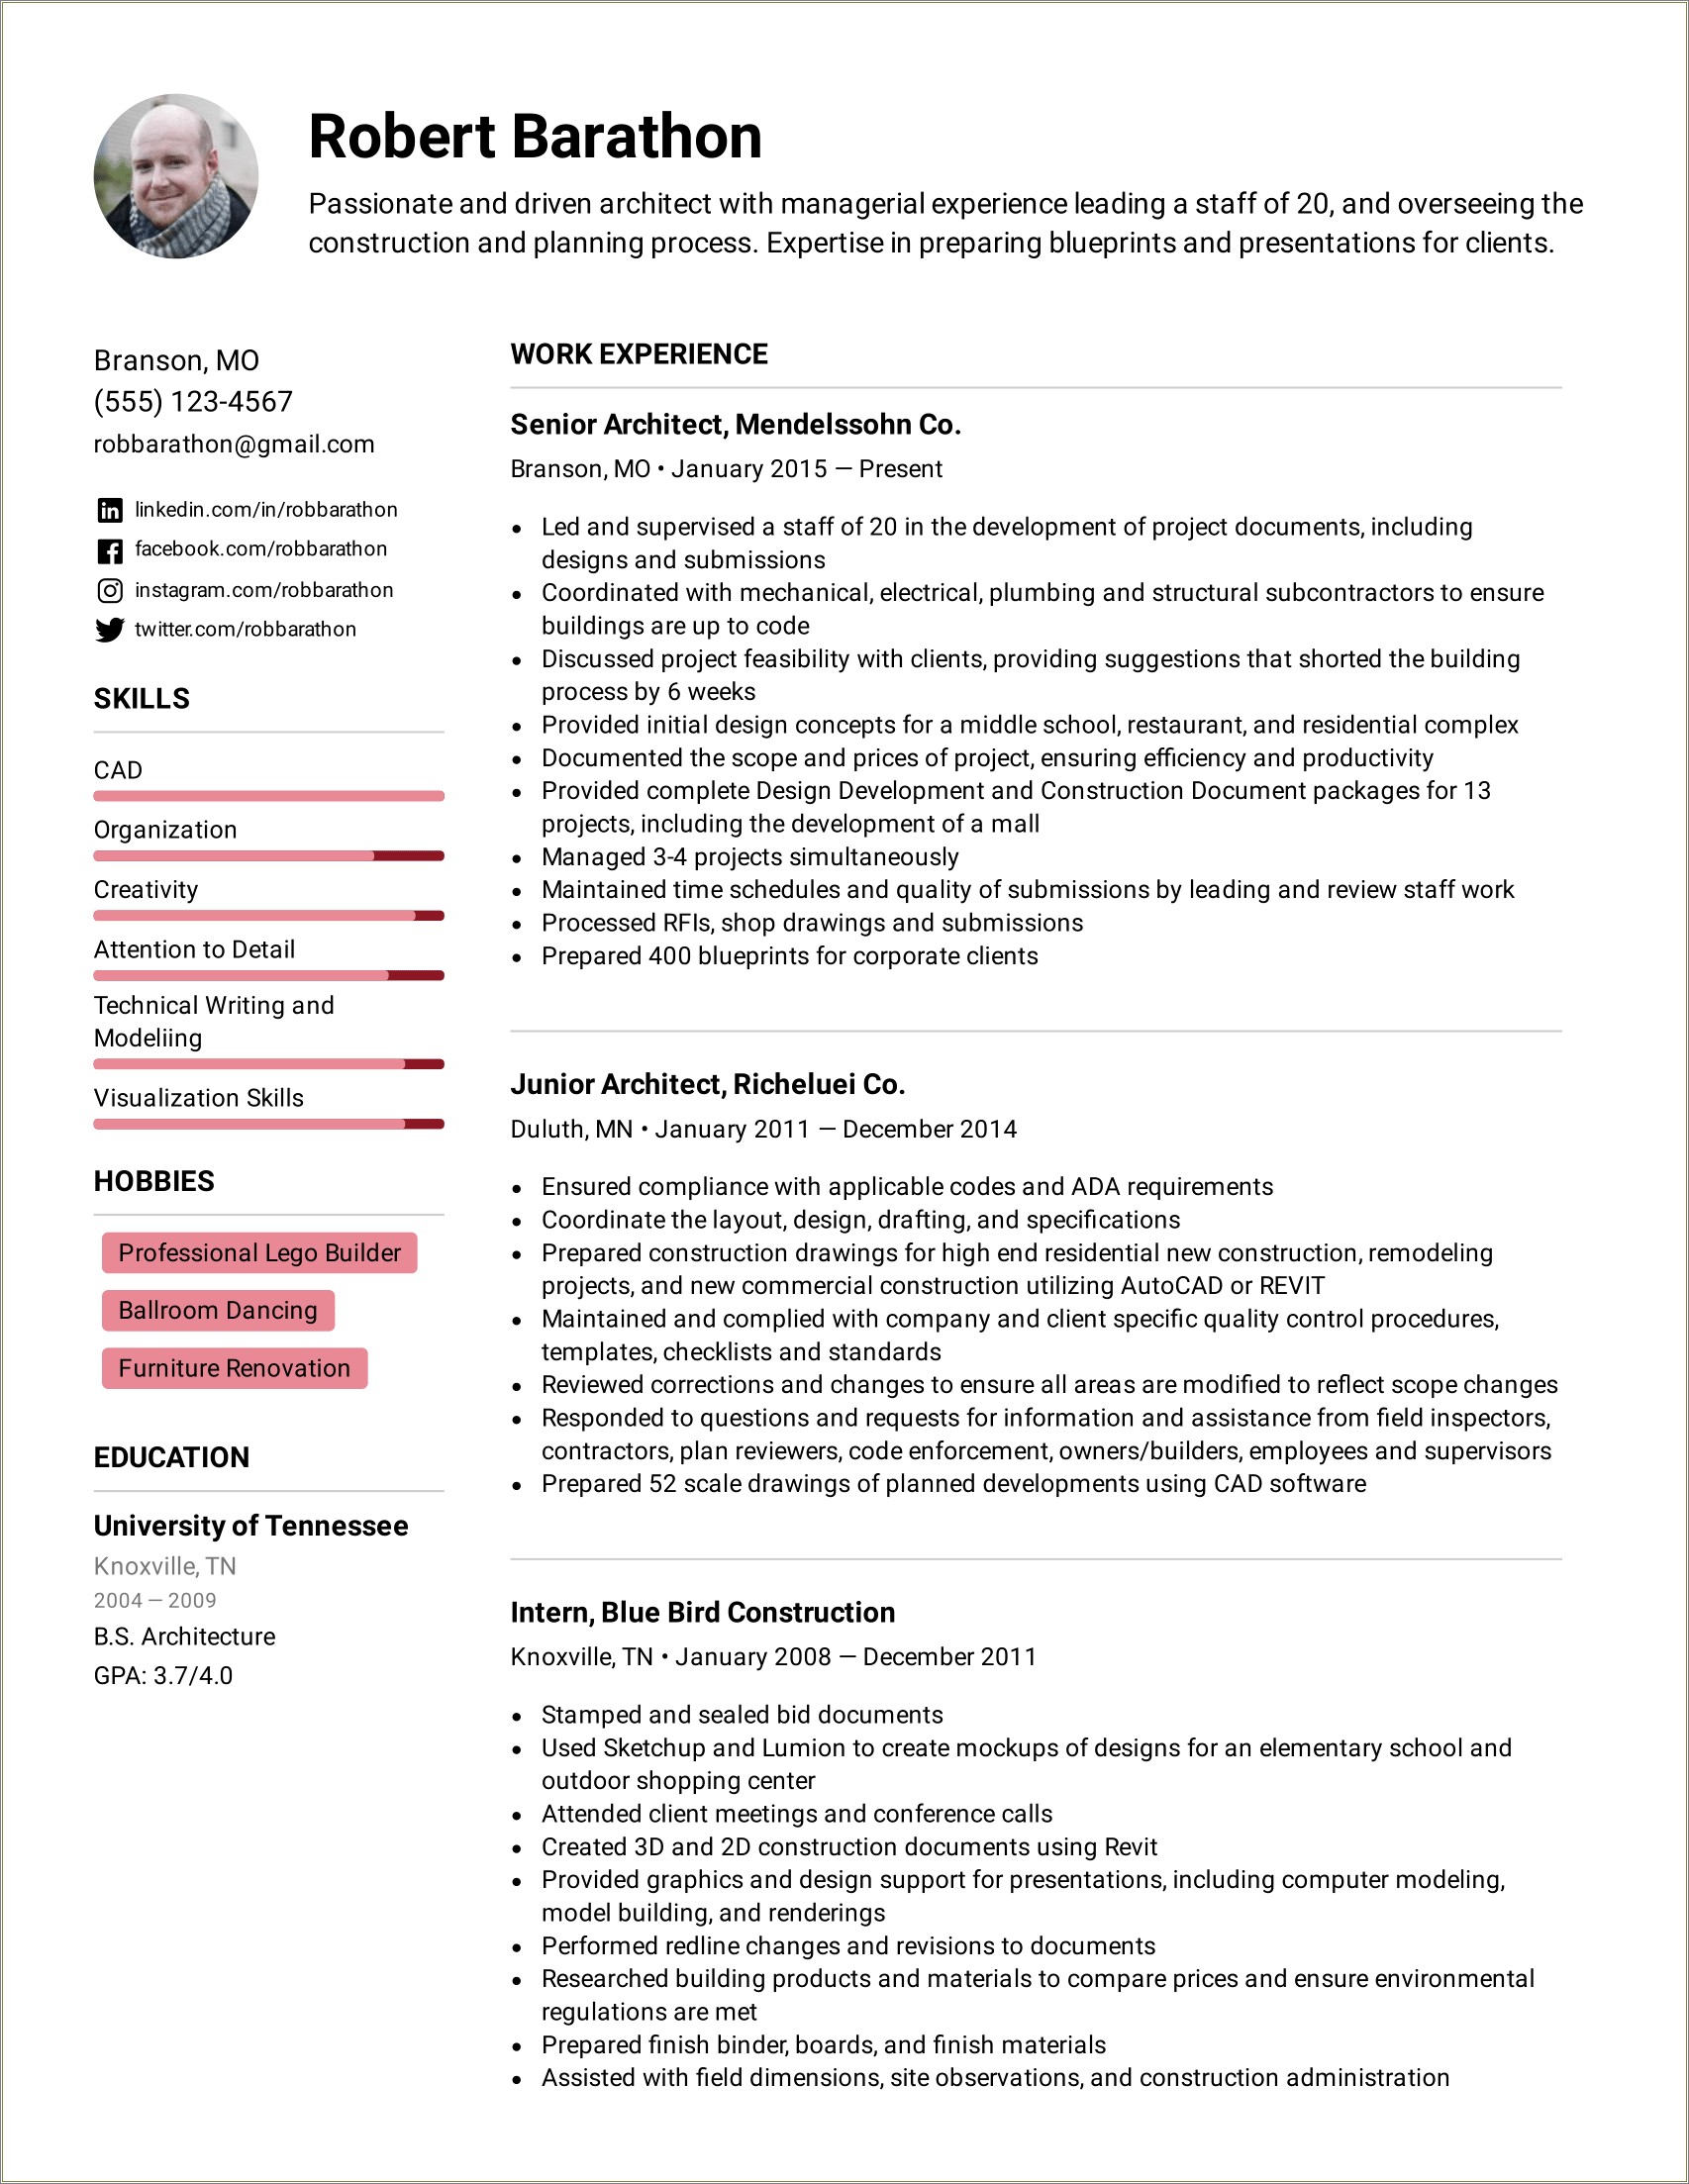 Resume Objective Examples For Cad Managers